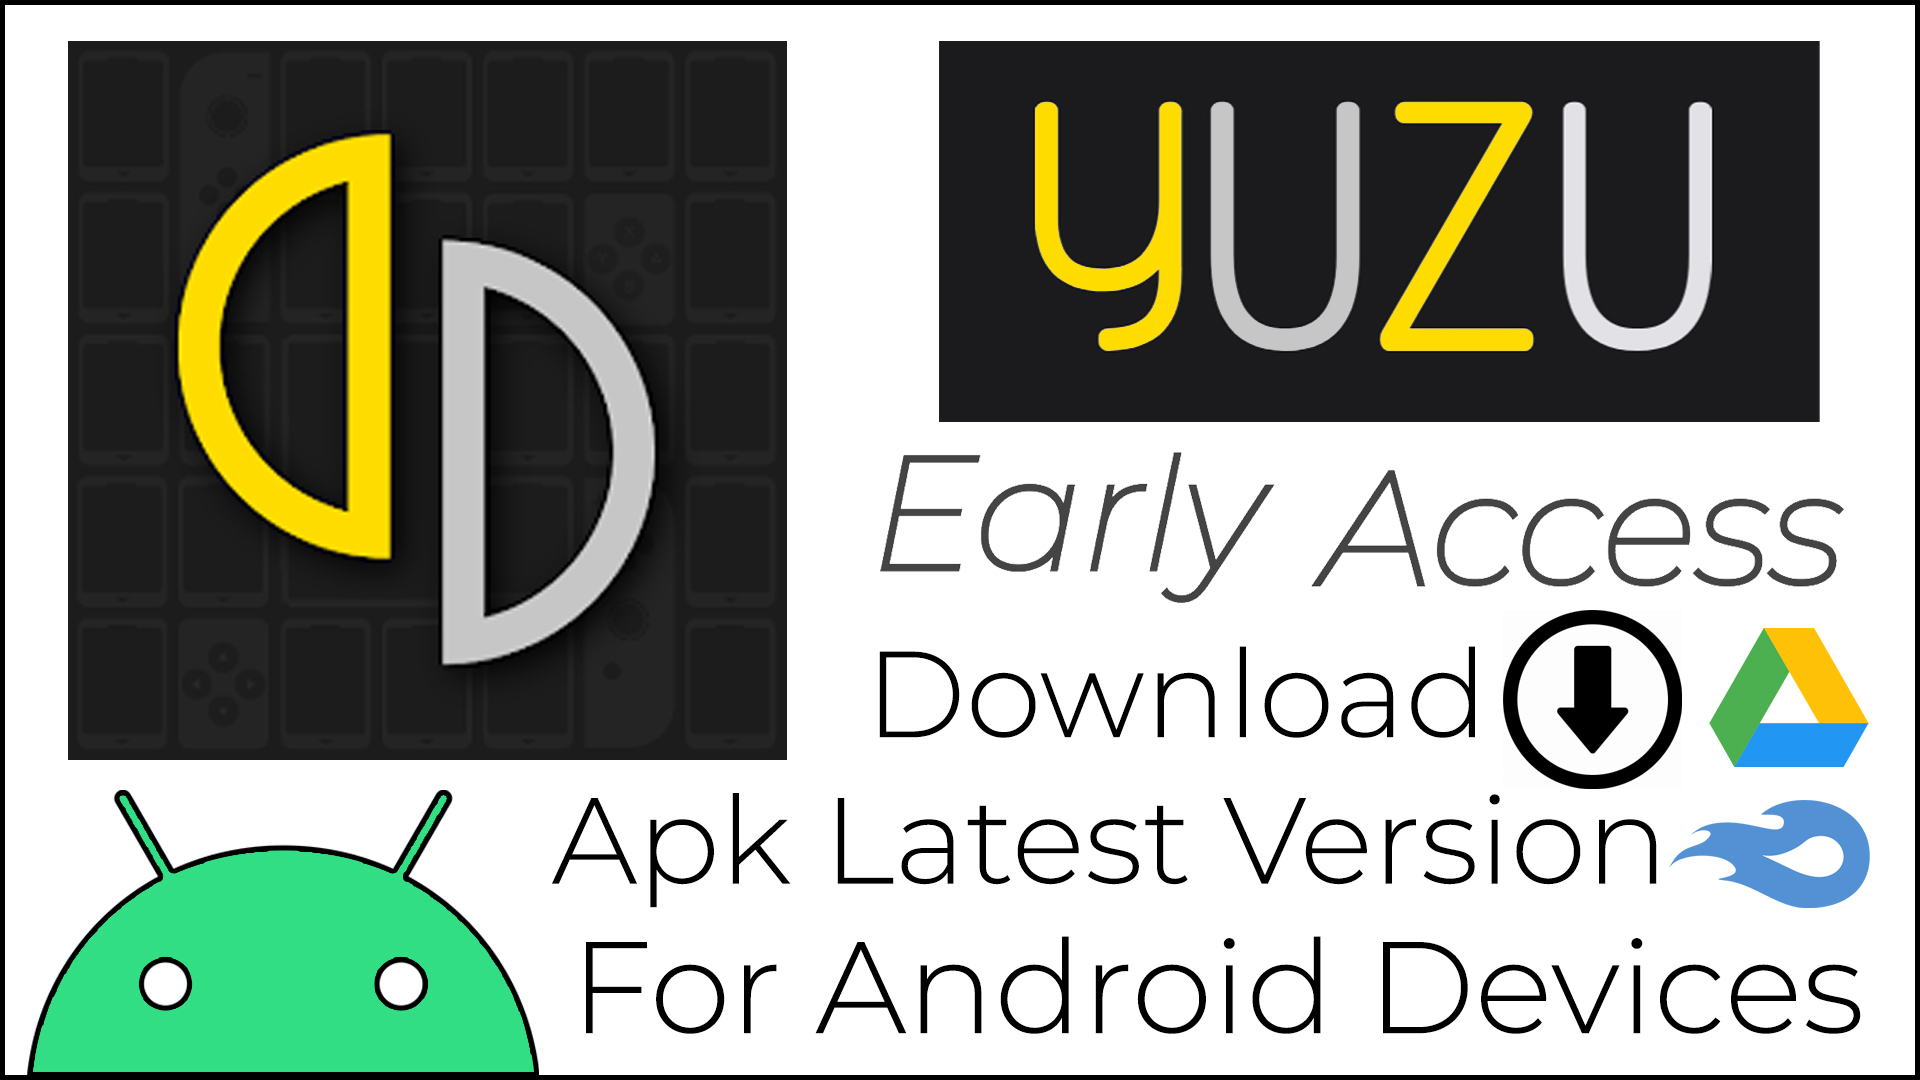 Yuzu Early Access APK v17/2921a2426 Download (Latest Version